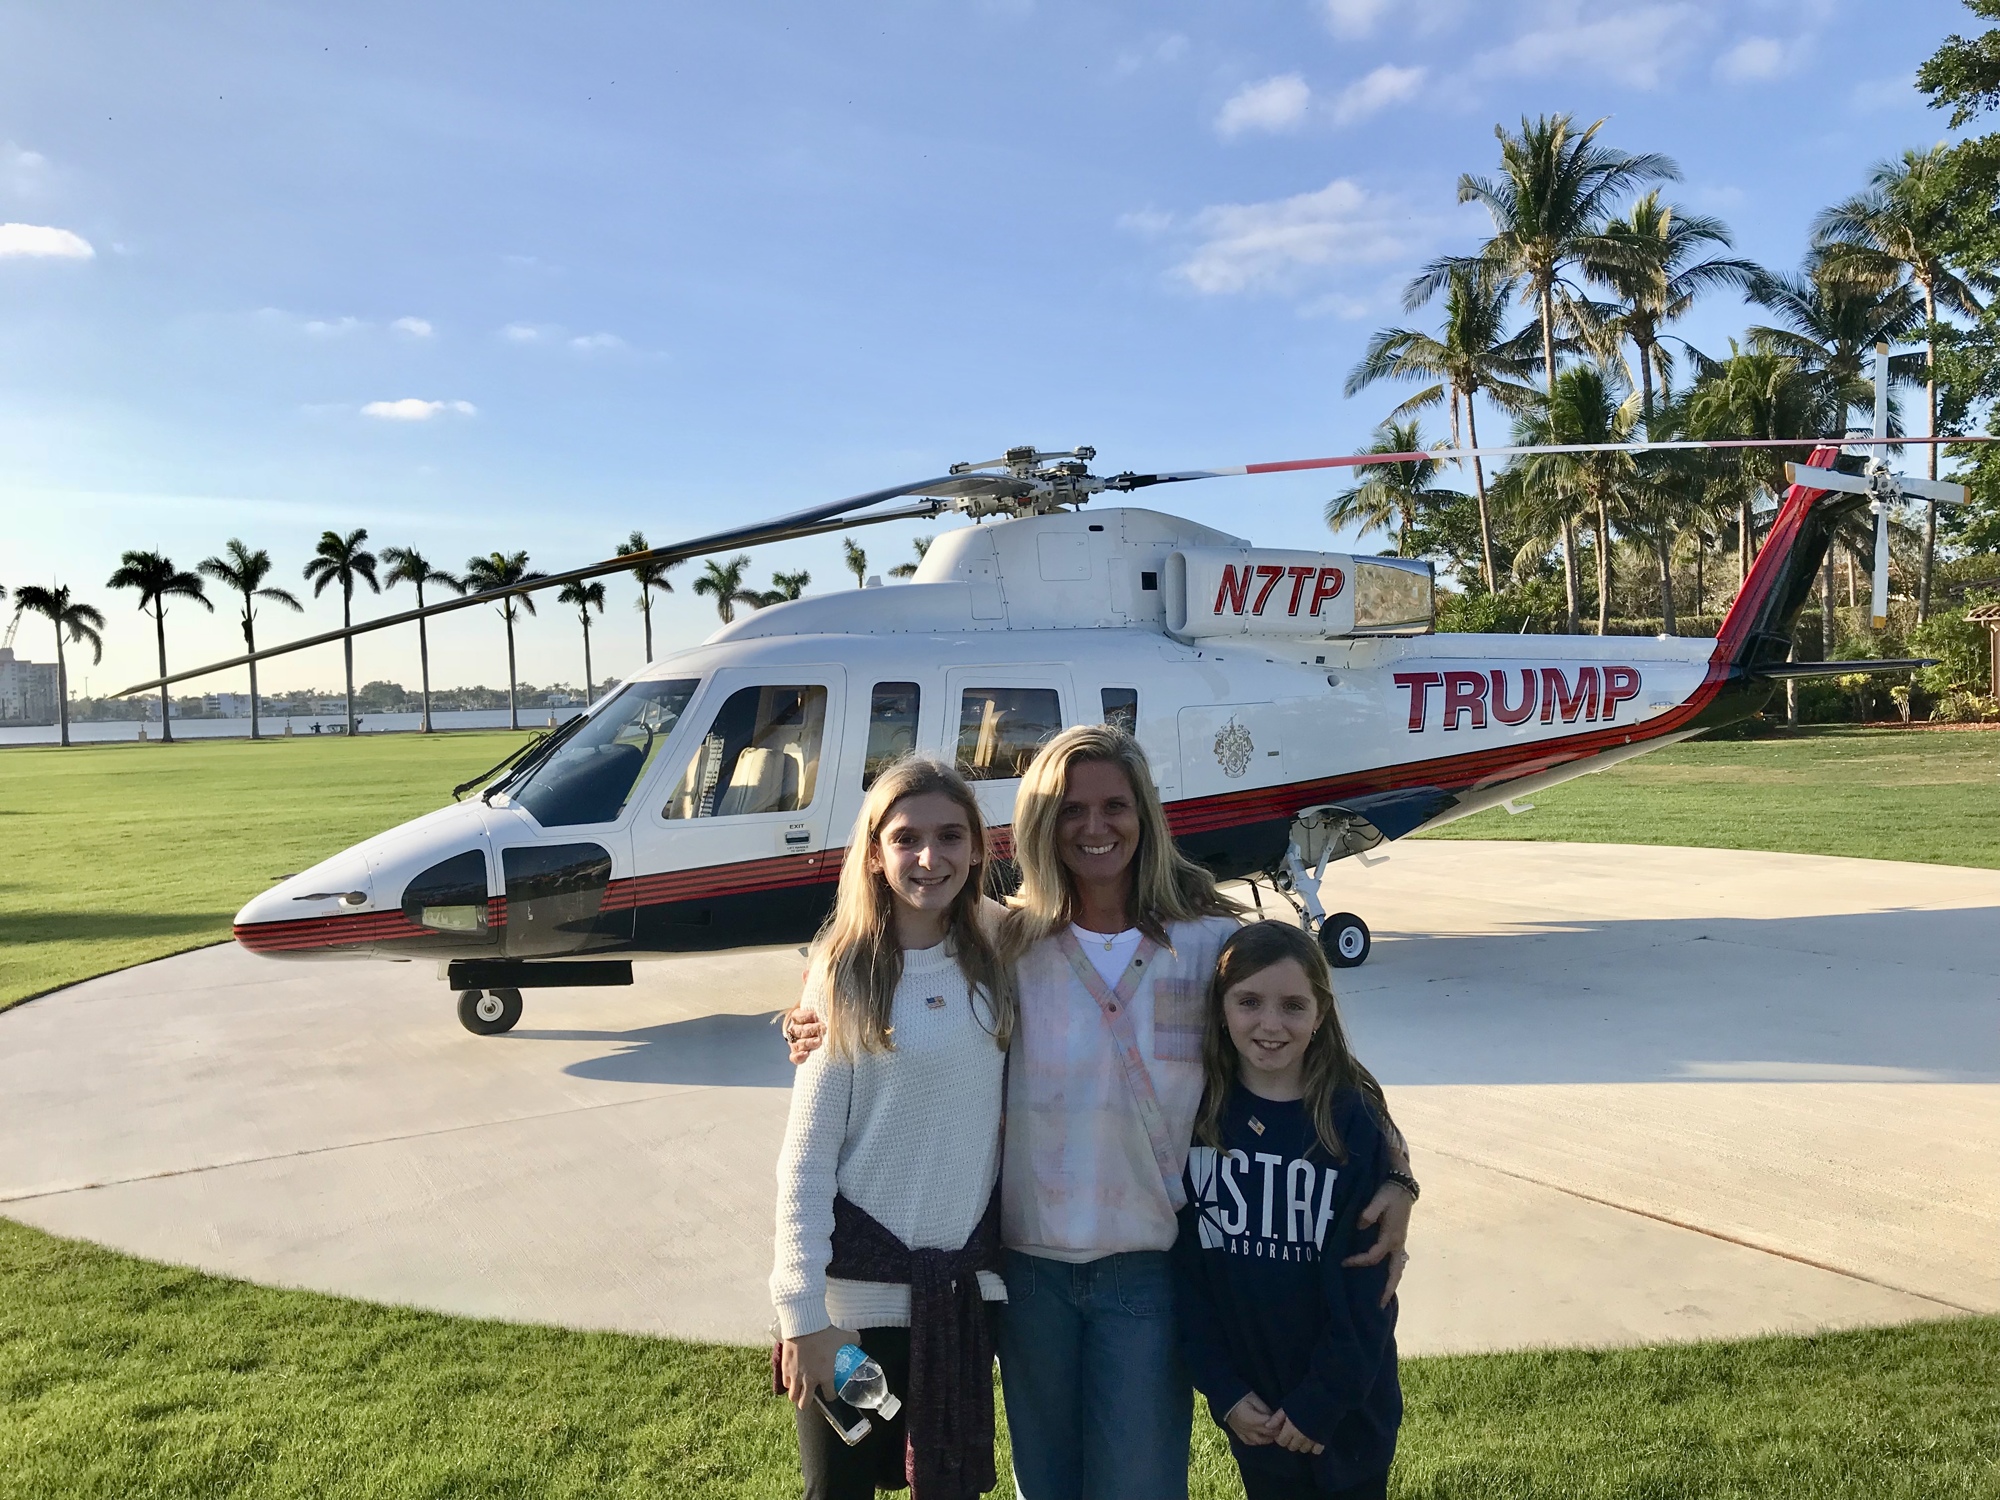 Katie Leccese of Windermere and her daughters, Brooke and Jamie, use Trump's helicopter as a backdrop for their photo.